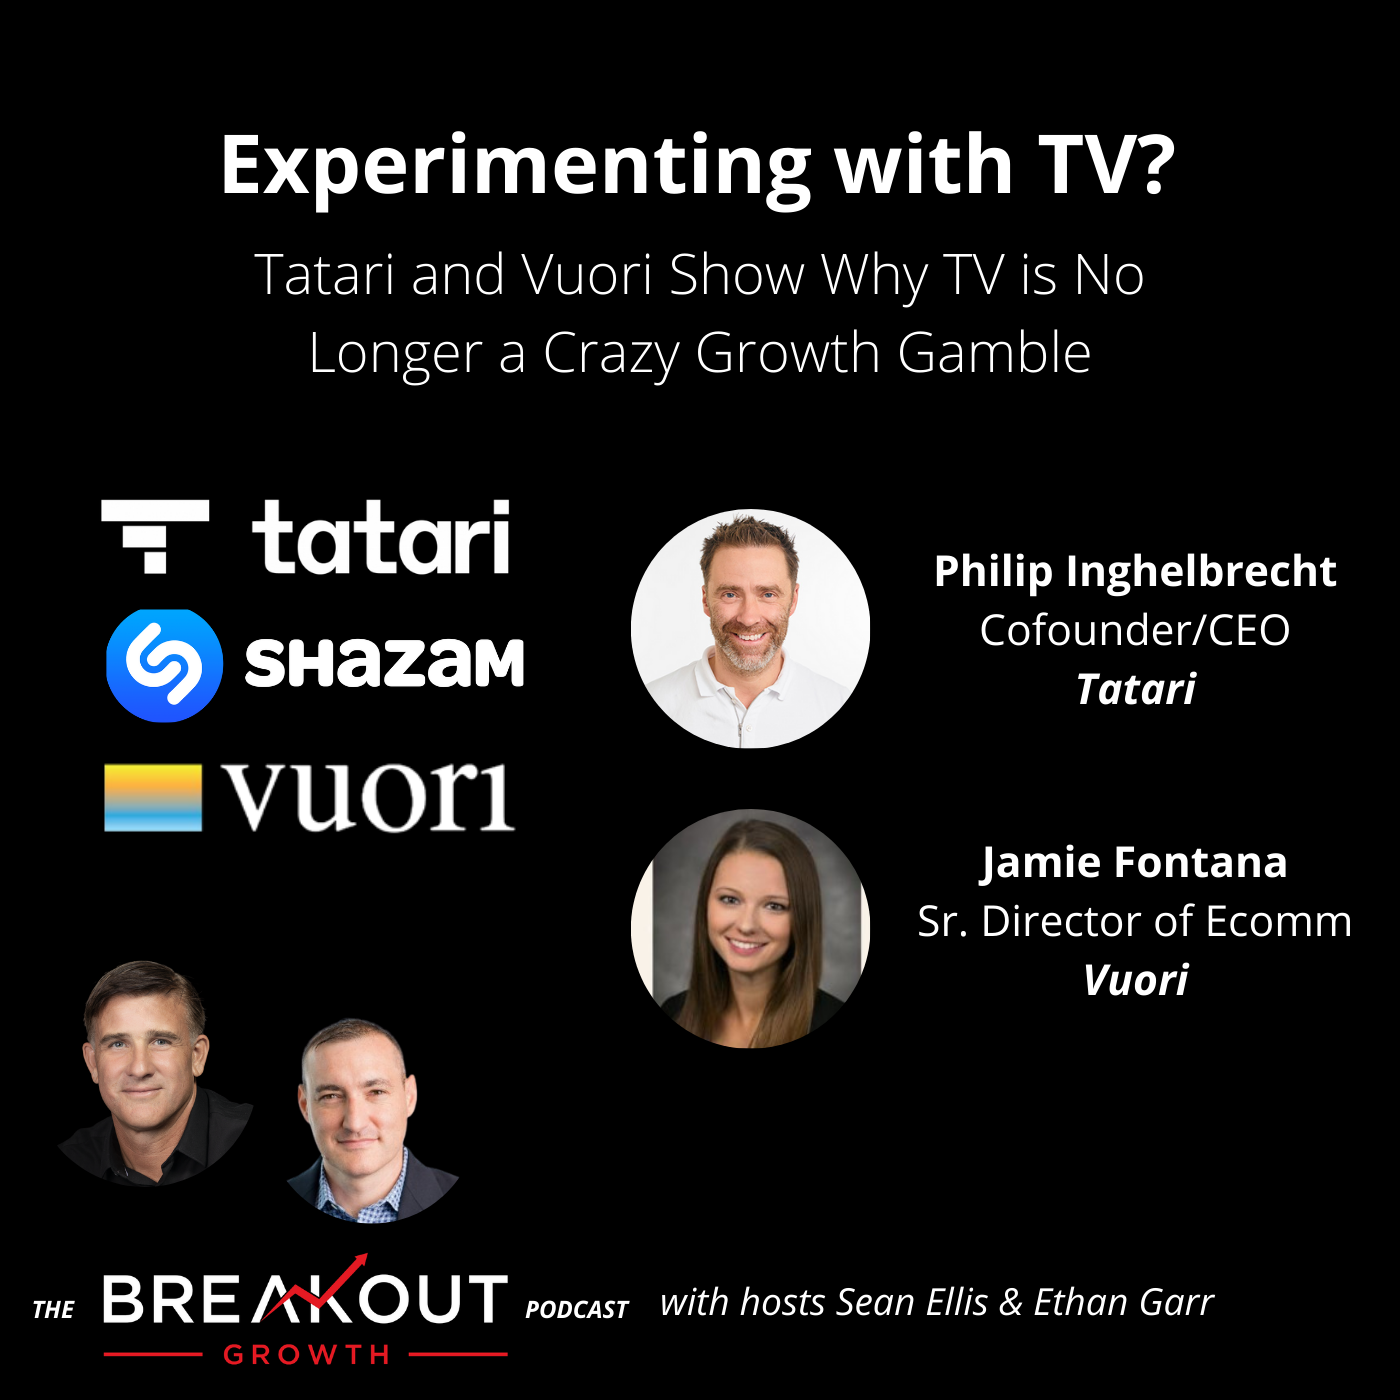 Experimenting with TV? Tatari and Vuori Show Why TV is No Longer a Crazy Growth Gamble